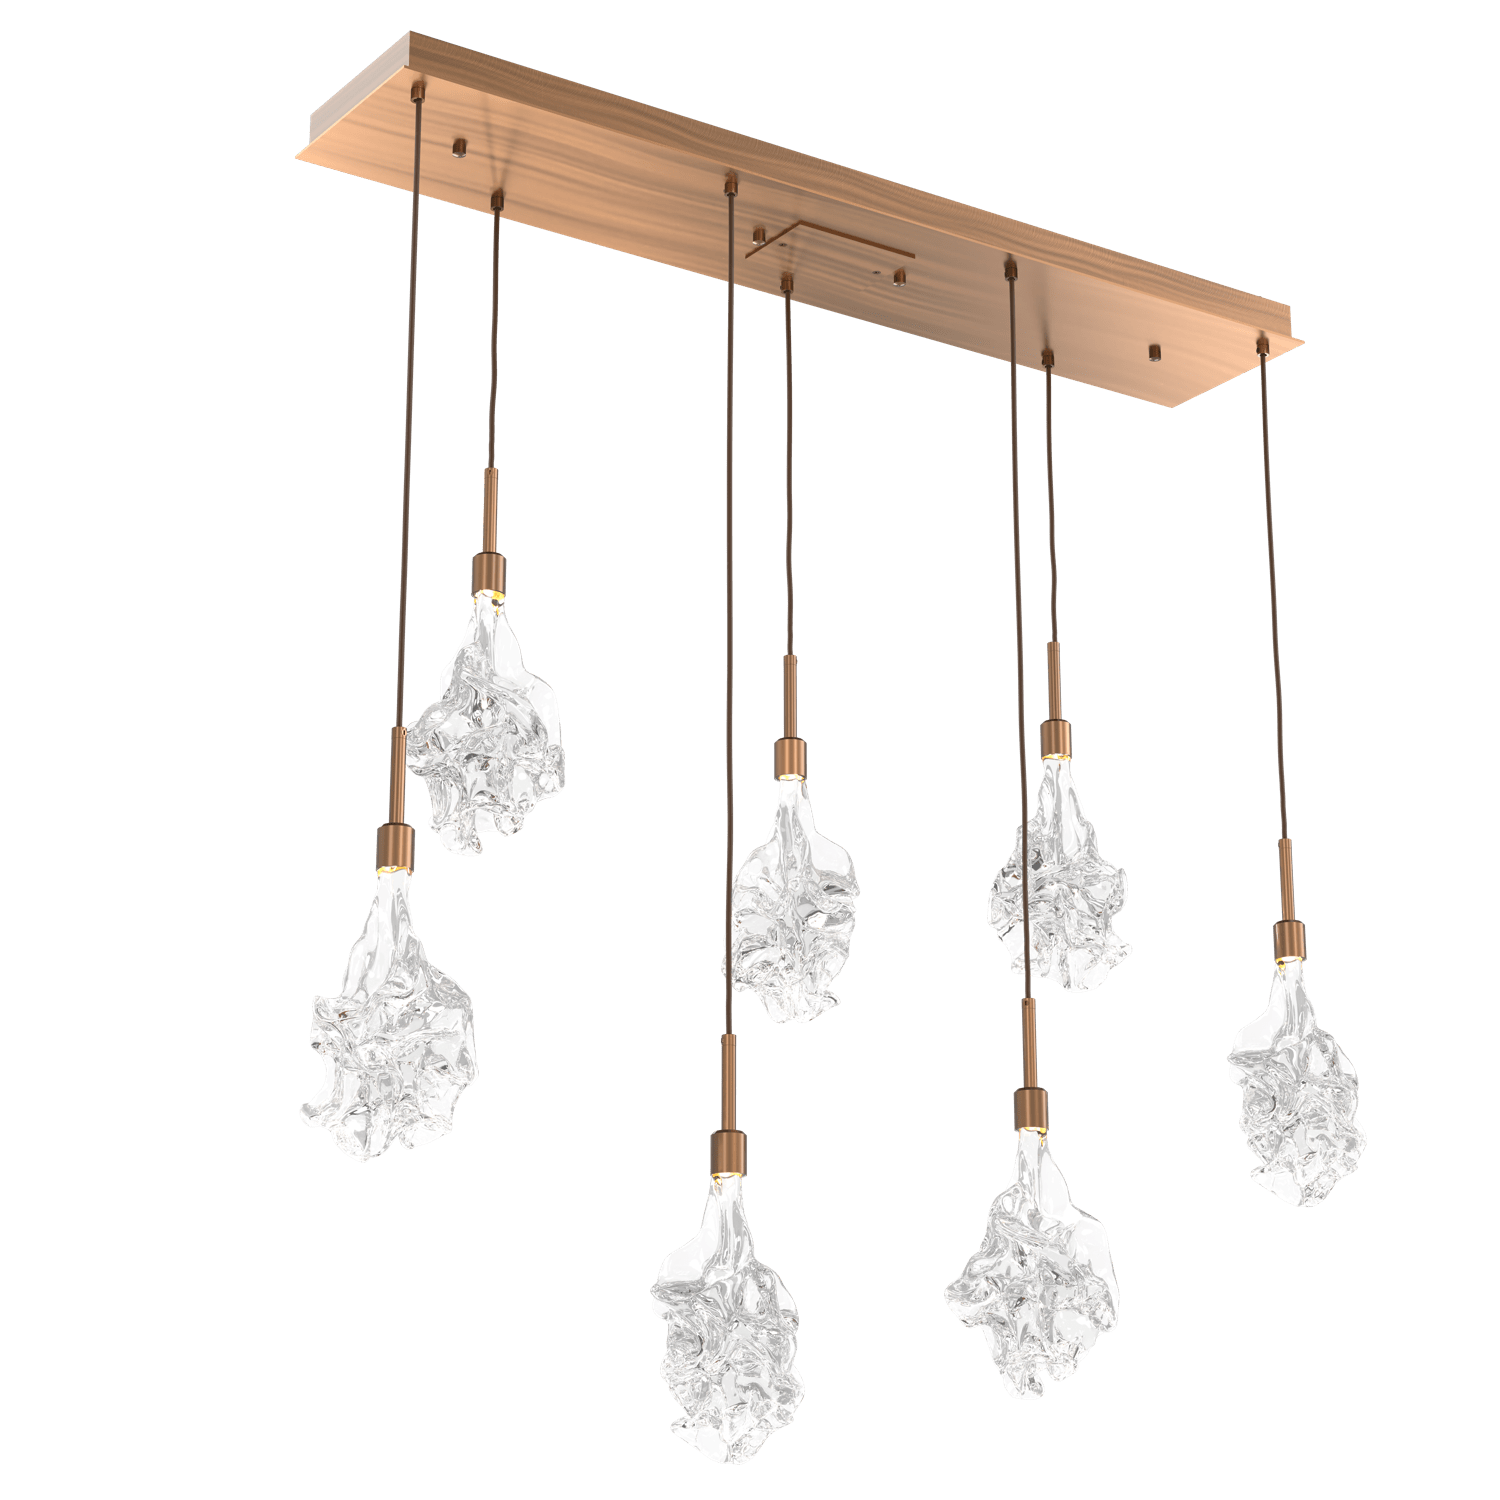 PLB0059-07-RB-Hammerton-Studio-Blossom-7-light-linear-pendant-chandelier-with-oil-rubbed-bronze-finish-and-clear-handblown-crystal-glass-shades-and-LED-lamping